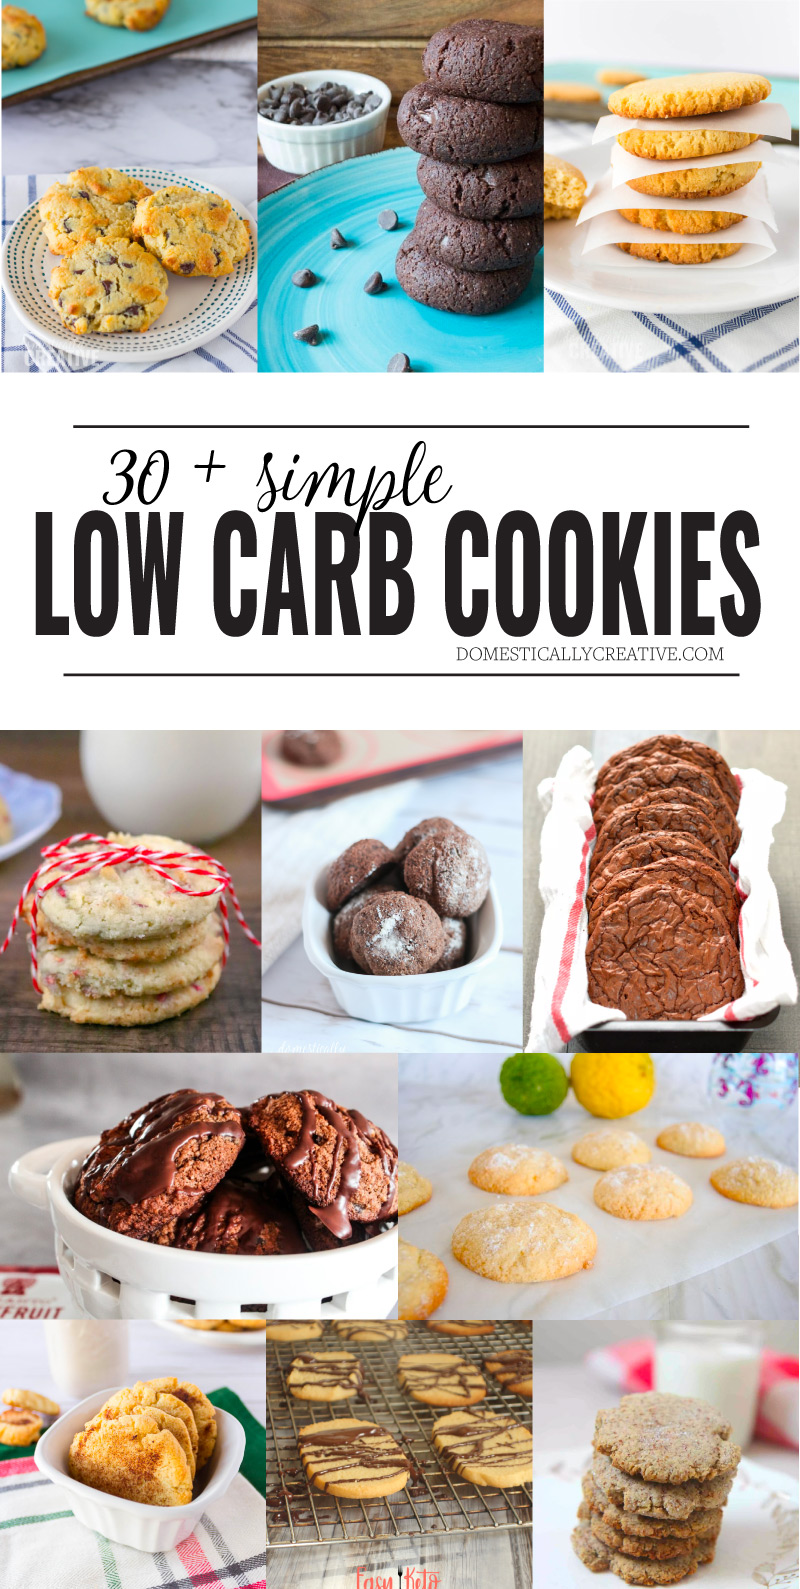 30+ Easy Low Carb Cookie Recipes pinterest image collage